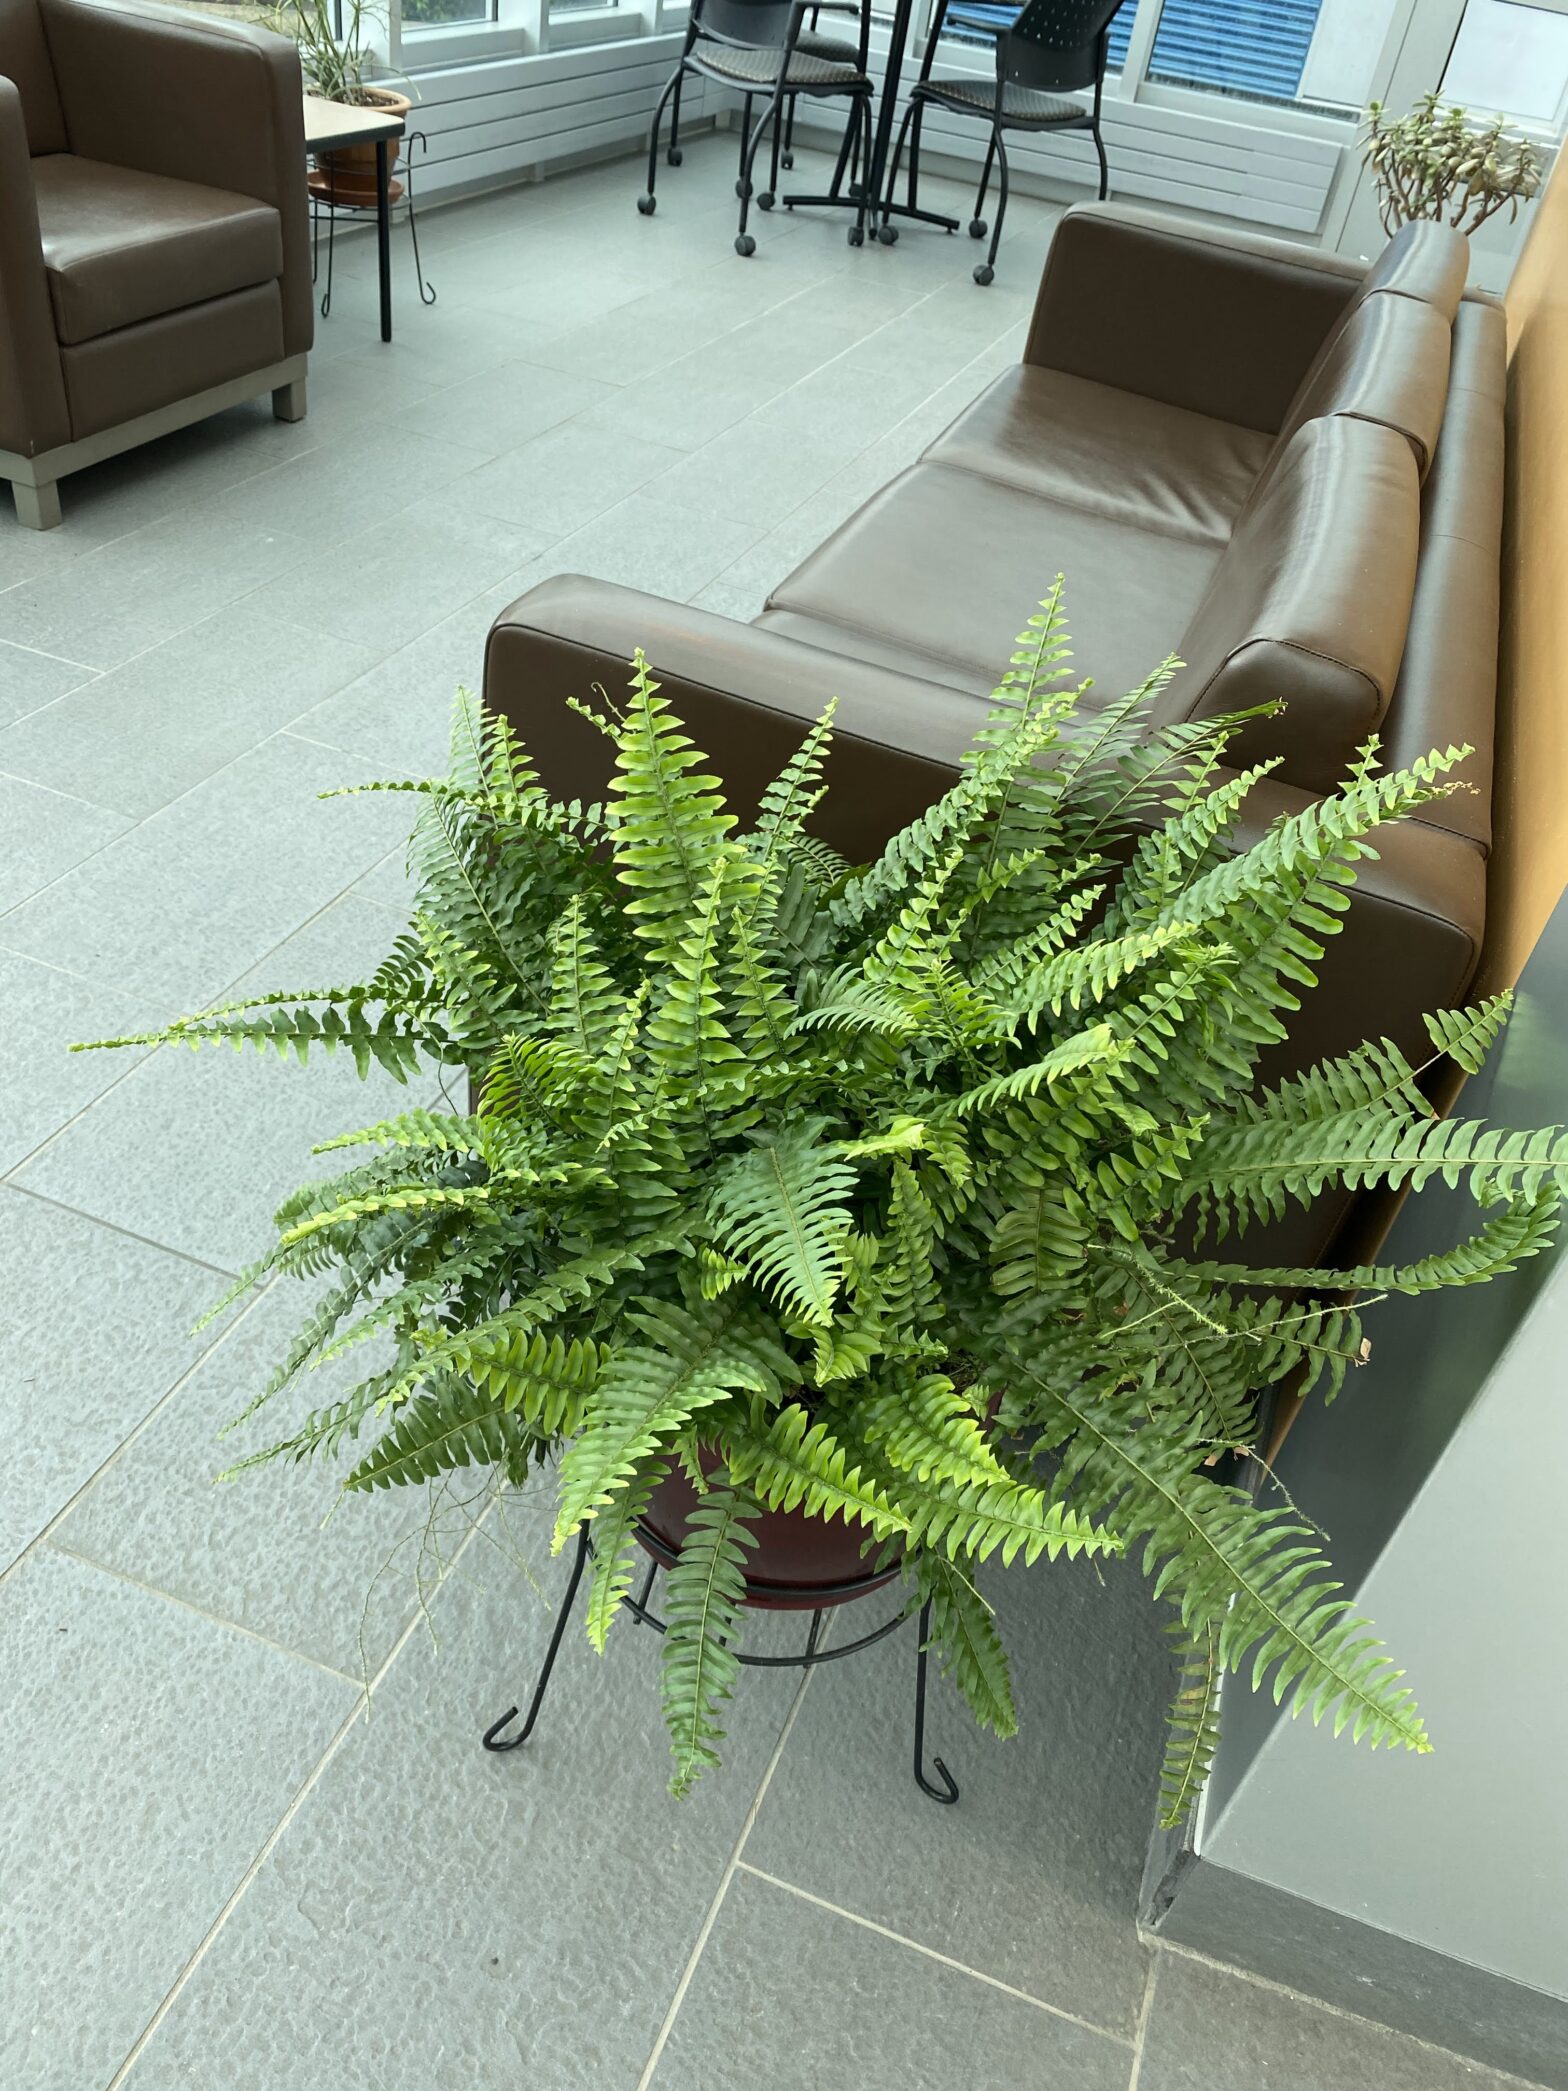 Boston fern in a conservatory in a college building